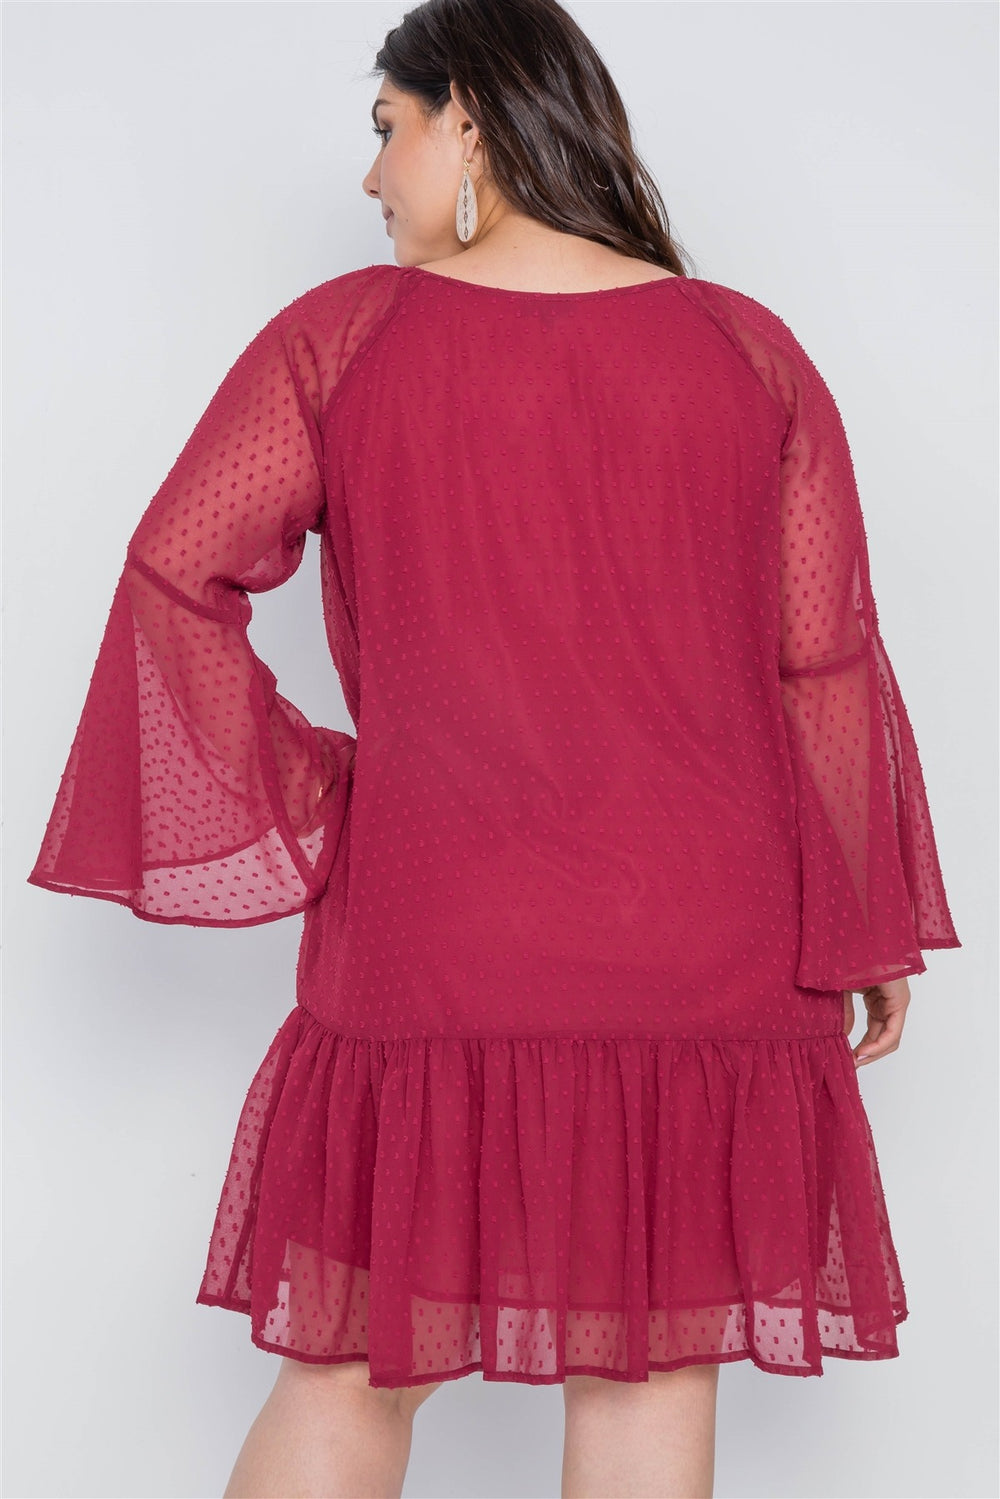 Plus Size Burgundy Bell Sleeves Shirred Dress